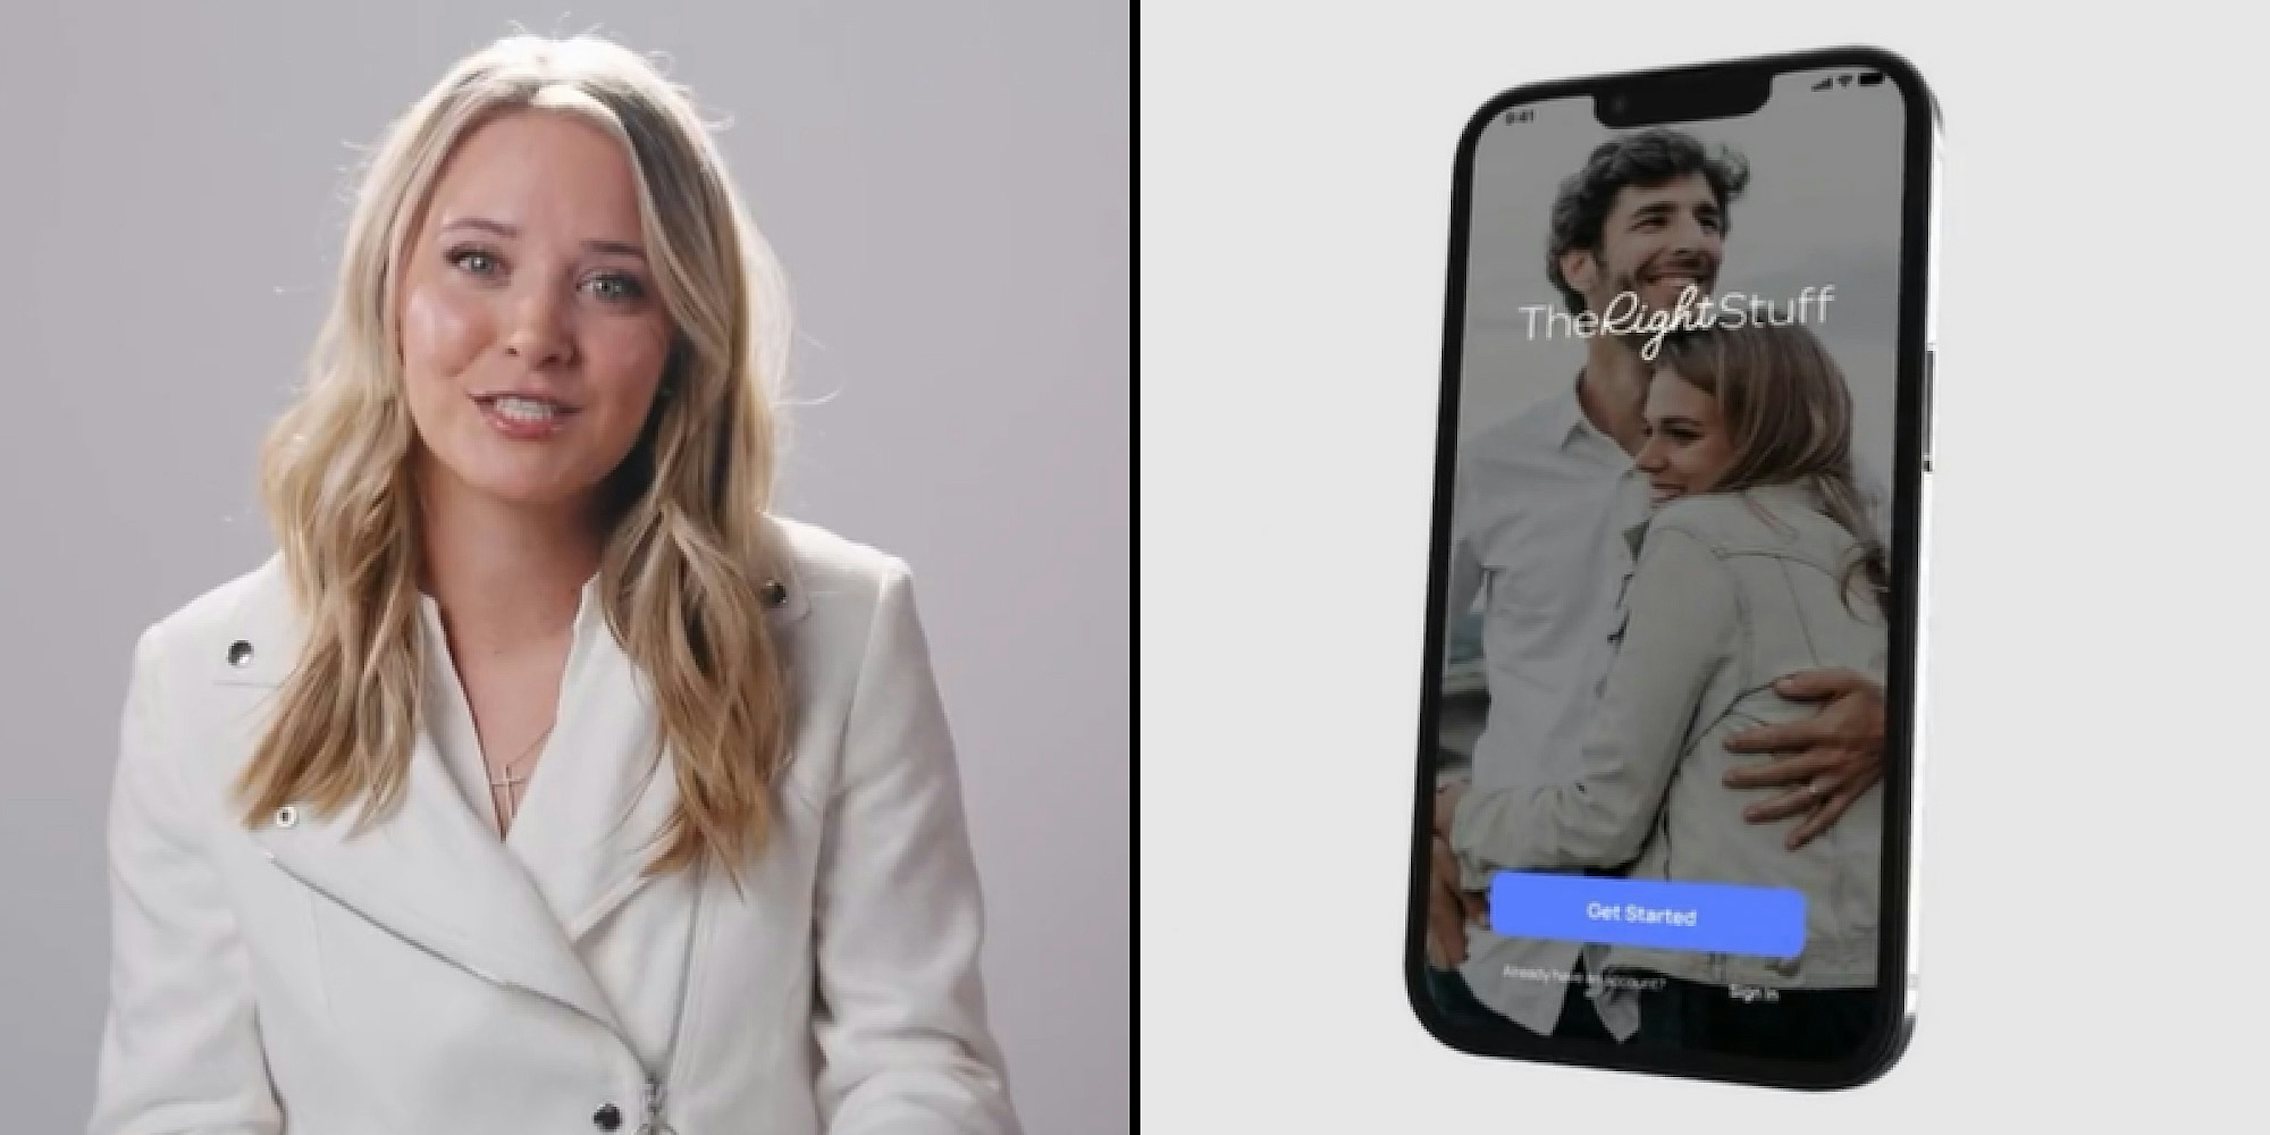 Ryann McEnany speaking on grey background (l) TheRightStuff dating app on phone on light grey background (r)